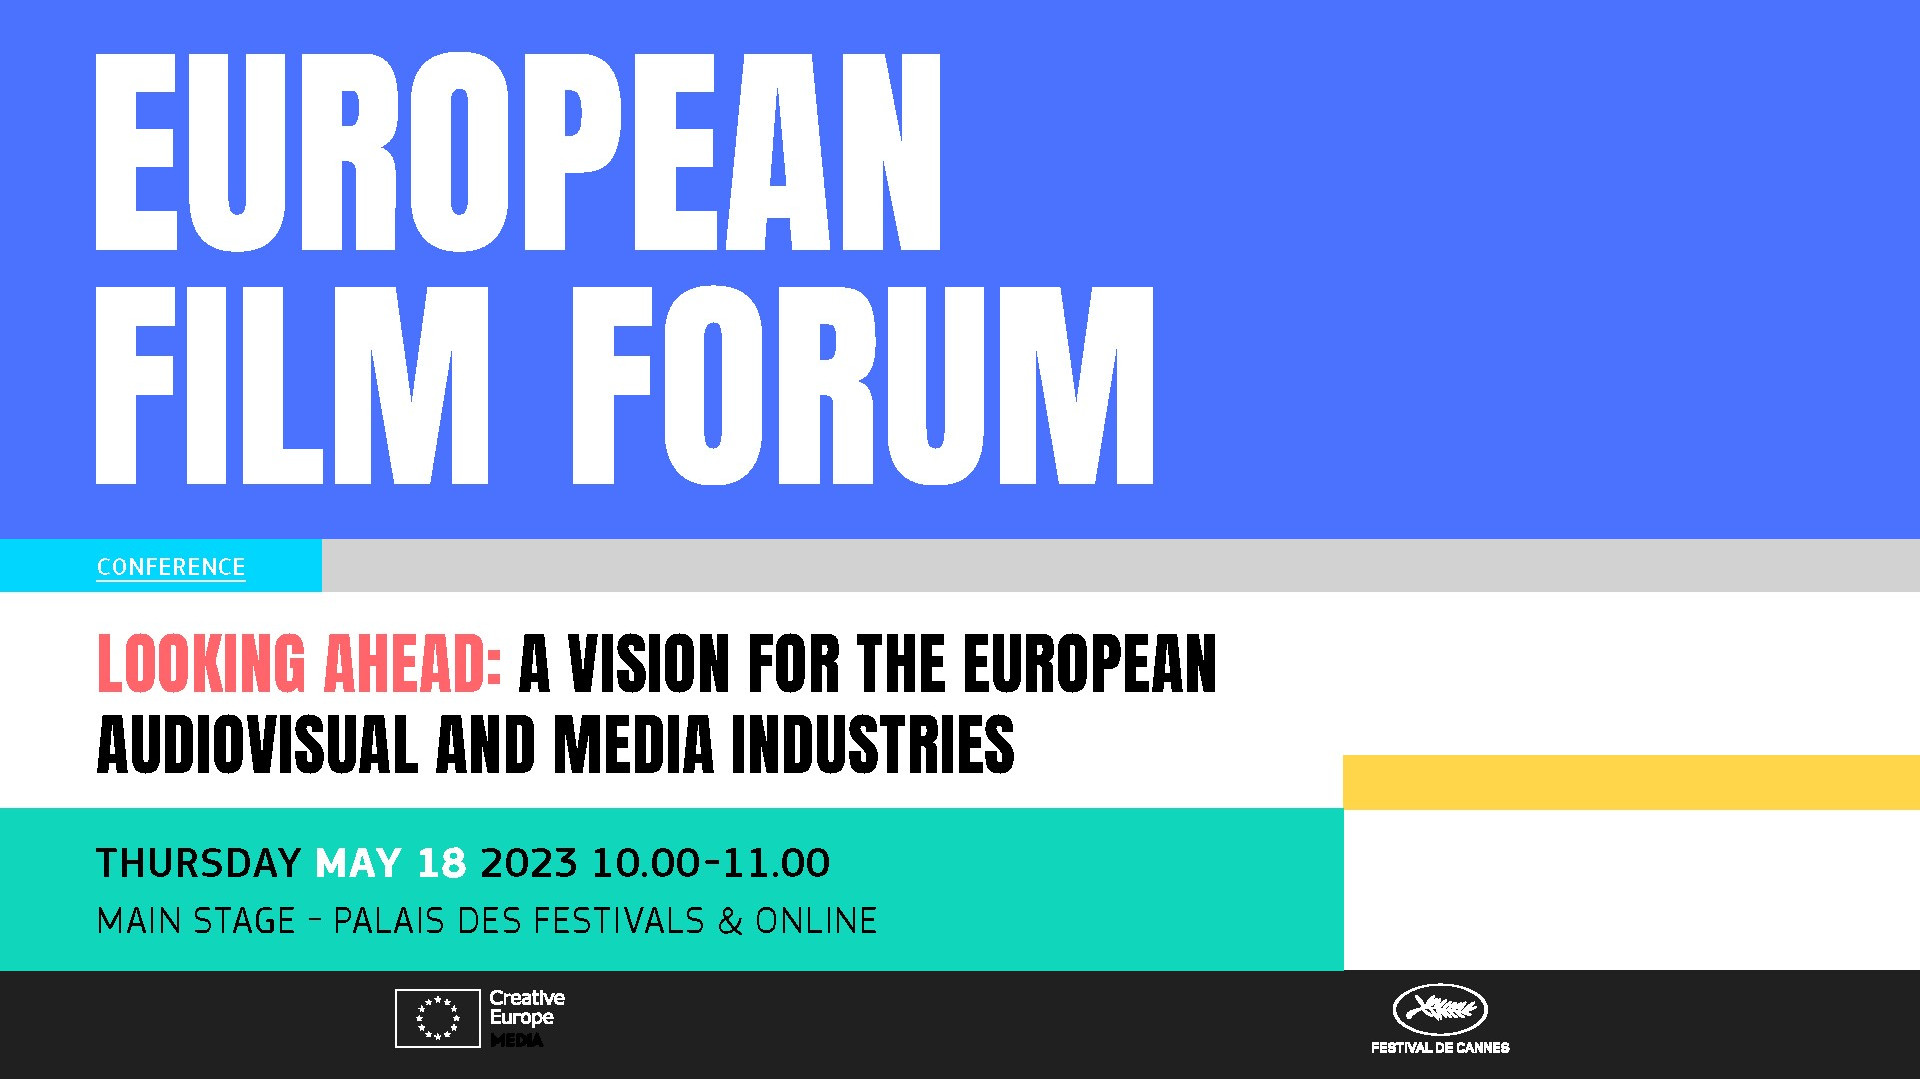 European Film Forum. Looking ahead: a vision for the European audiovisual and media industries. Thursday 18 May 2023, from 10:00 to 11:00. Main stage, Palais des festivals & online. Illustrasjon.